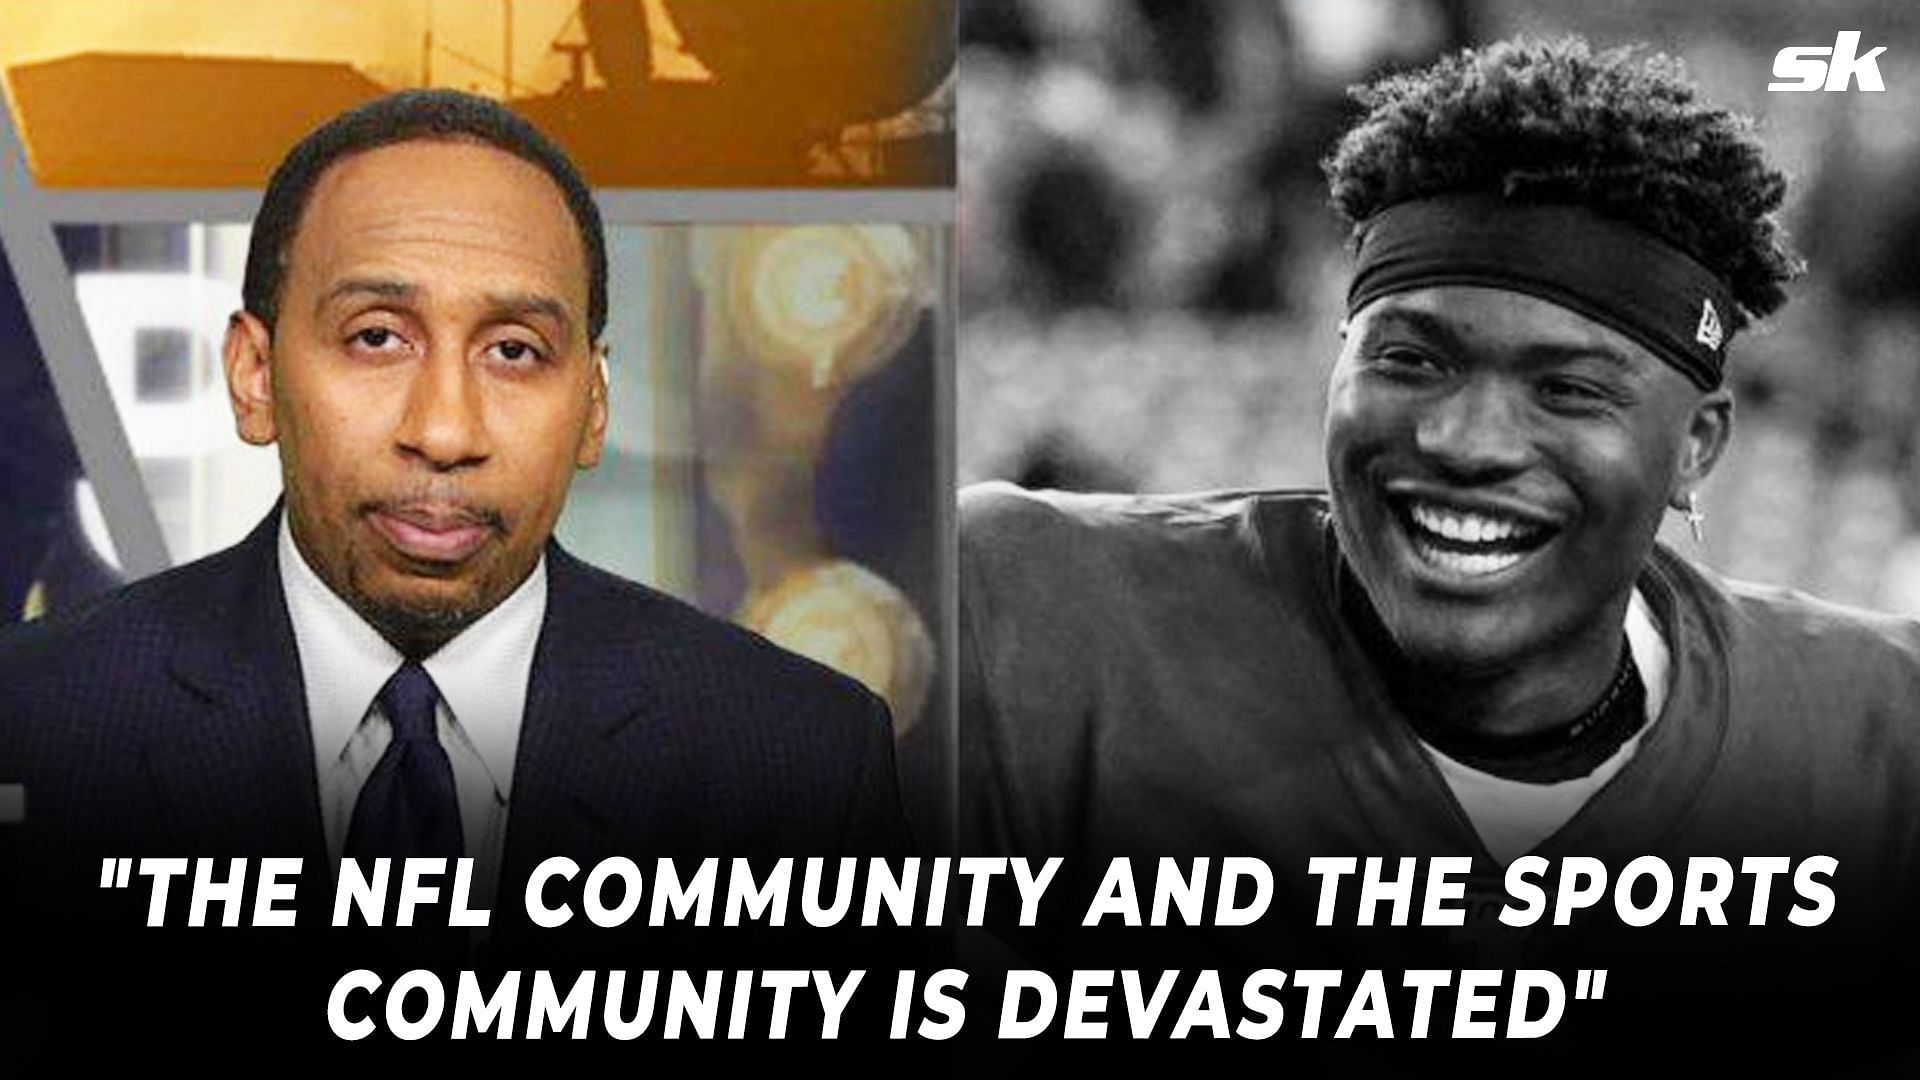 Stephen A. Smith and the late Dwayne Haskins